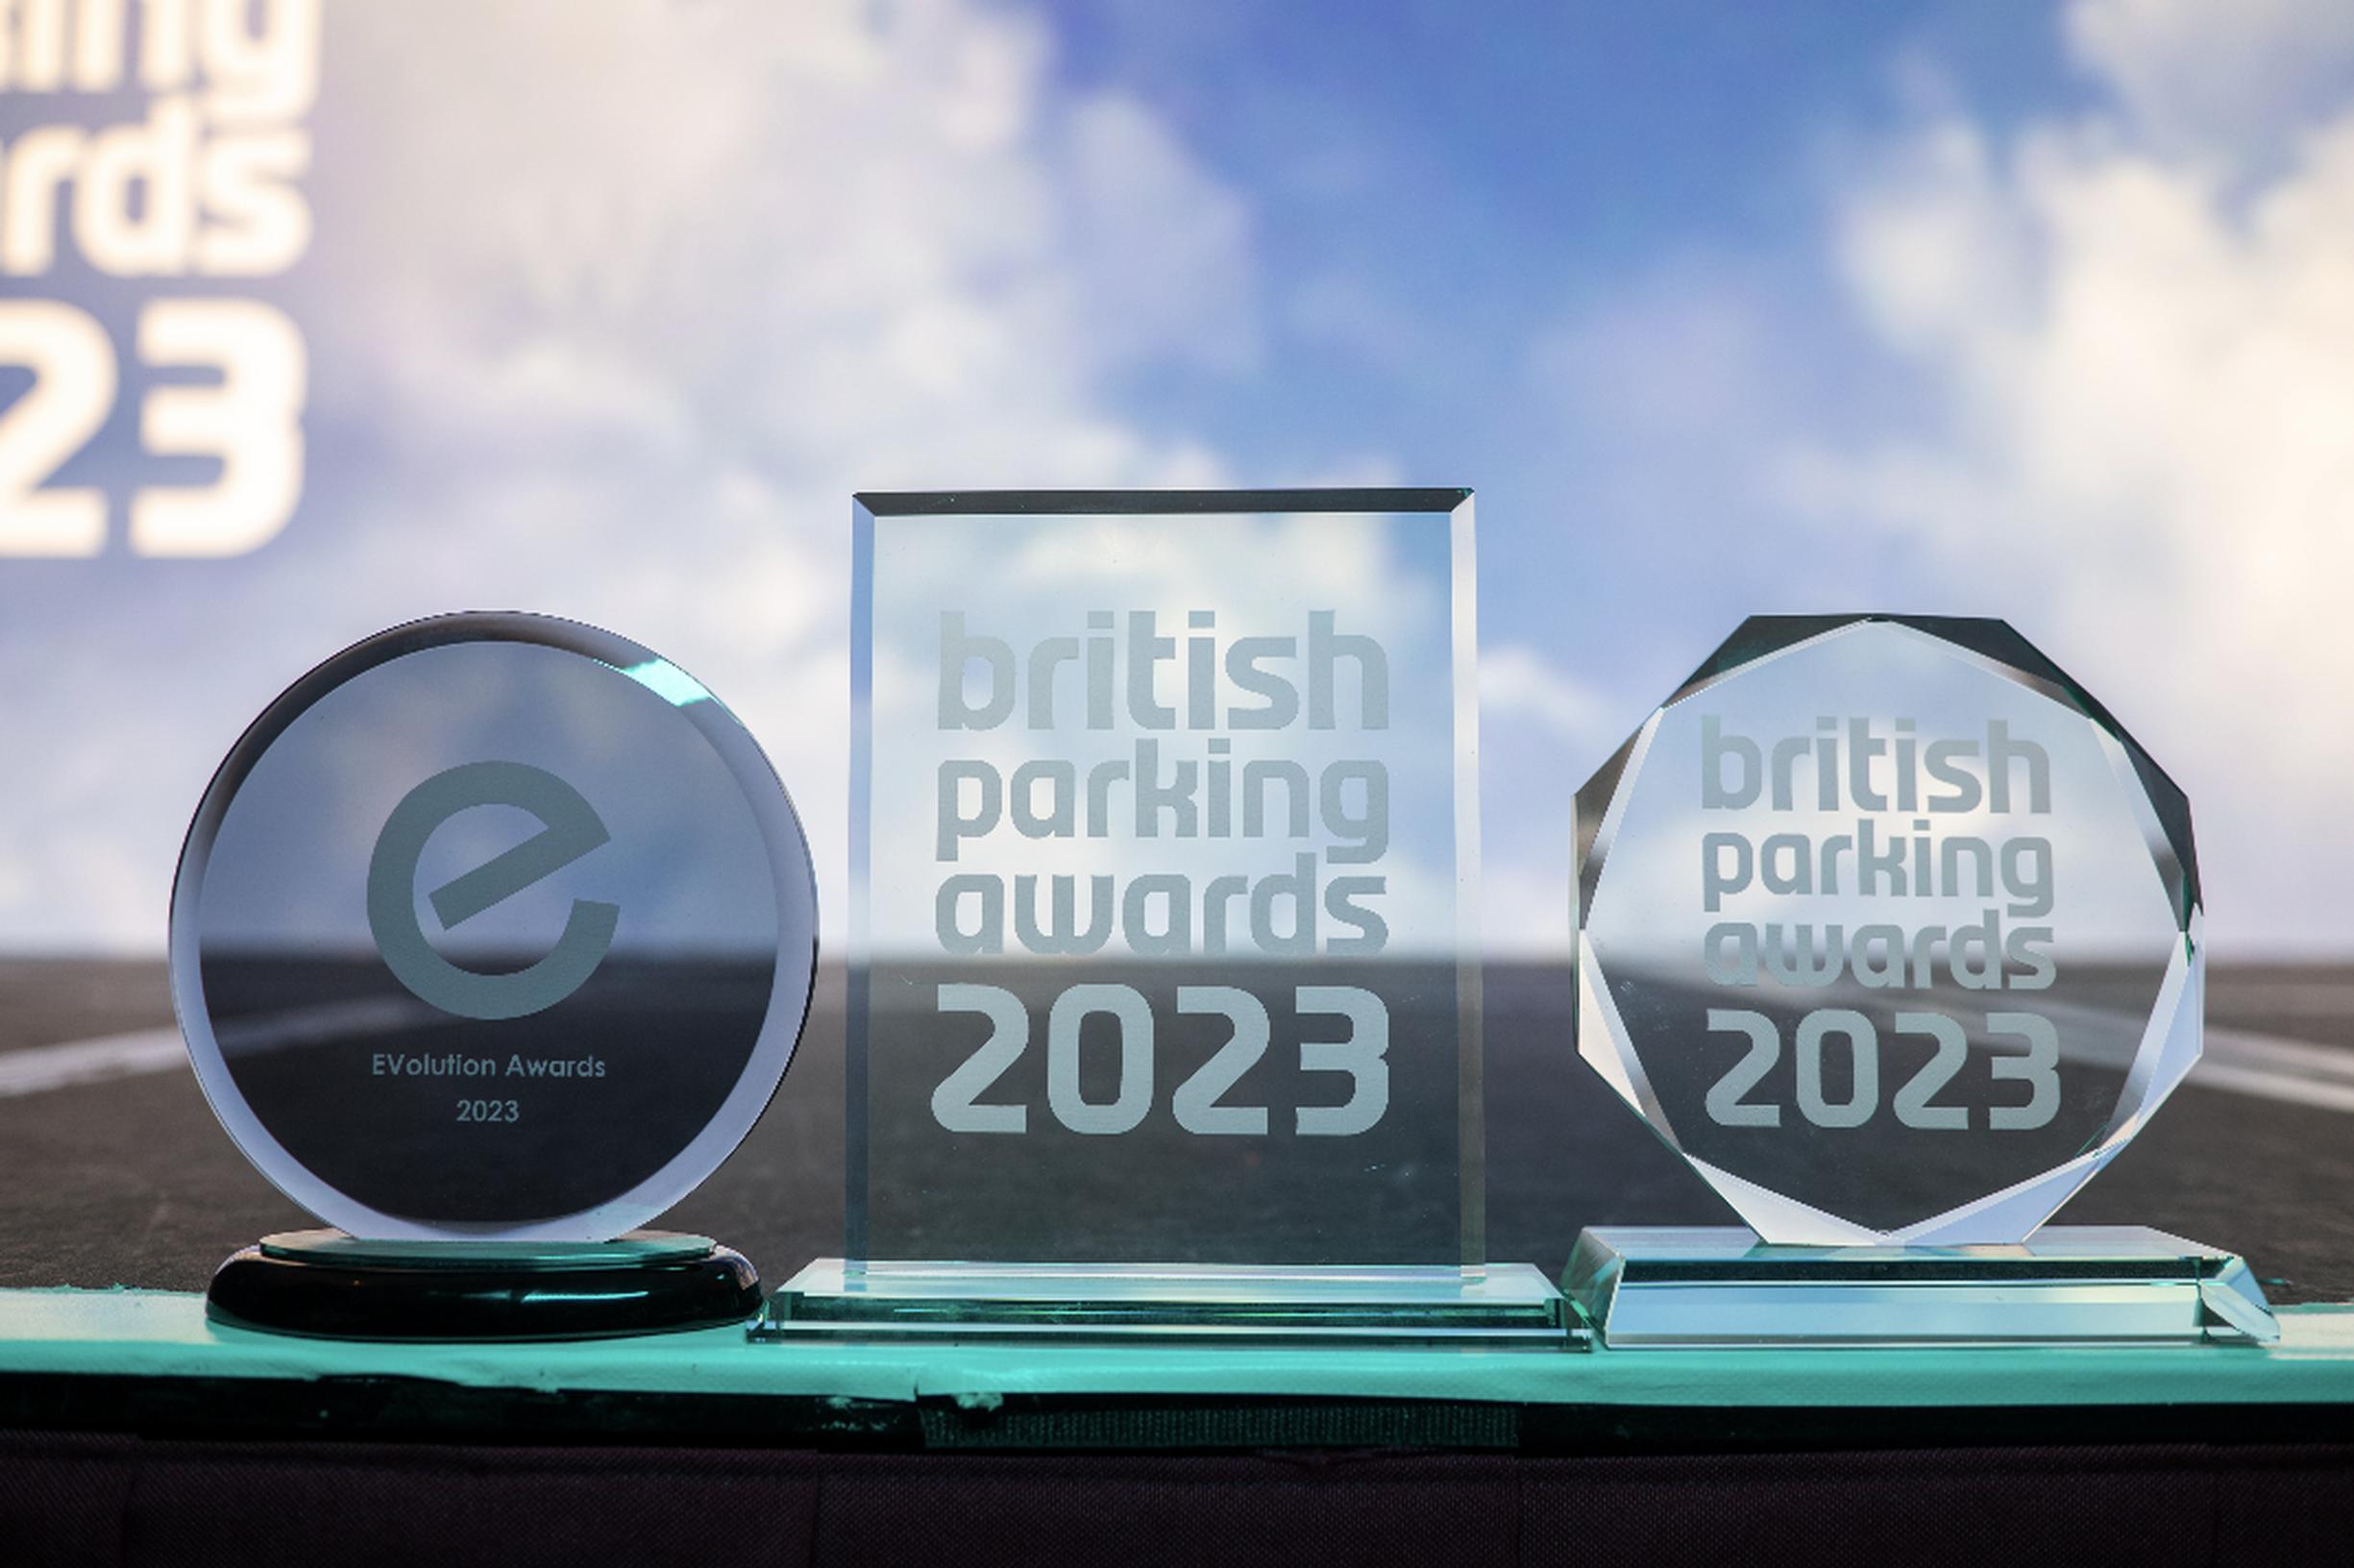 The British Parking Awards trophies